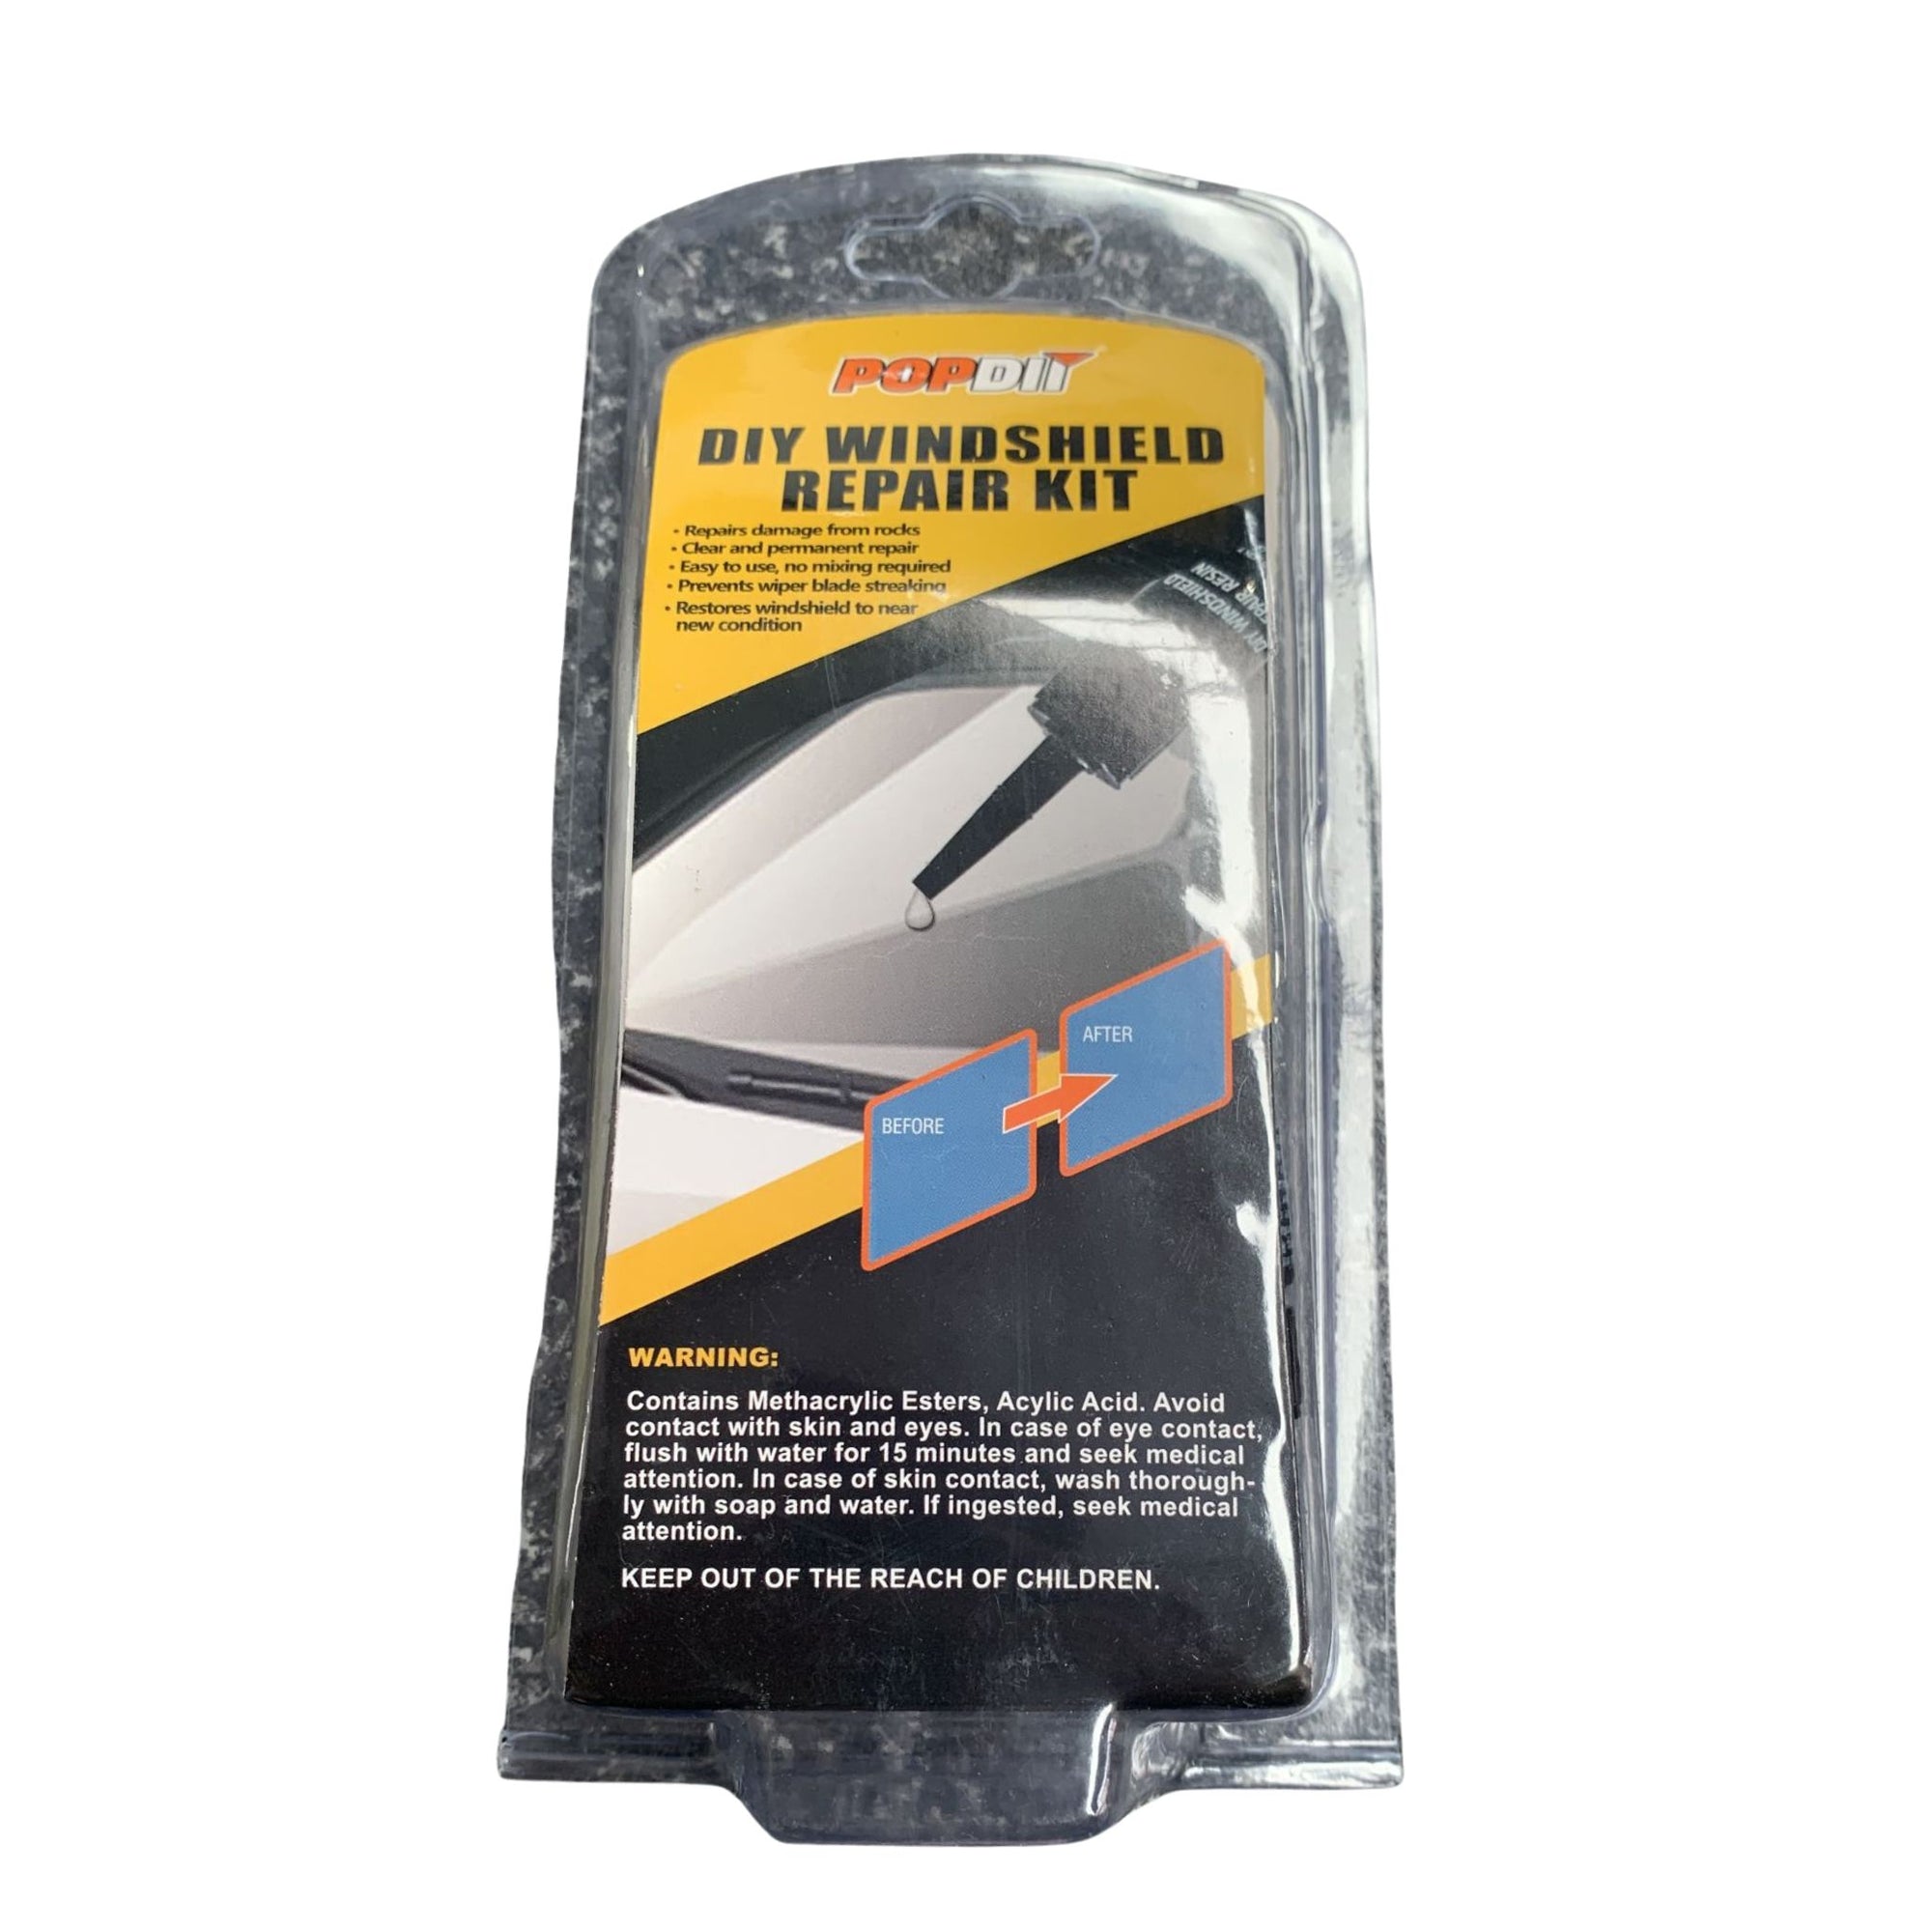 DIY Windshield Repair Kit - South East Clearance Centre